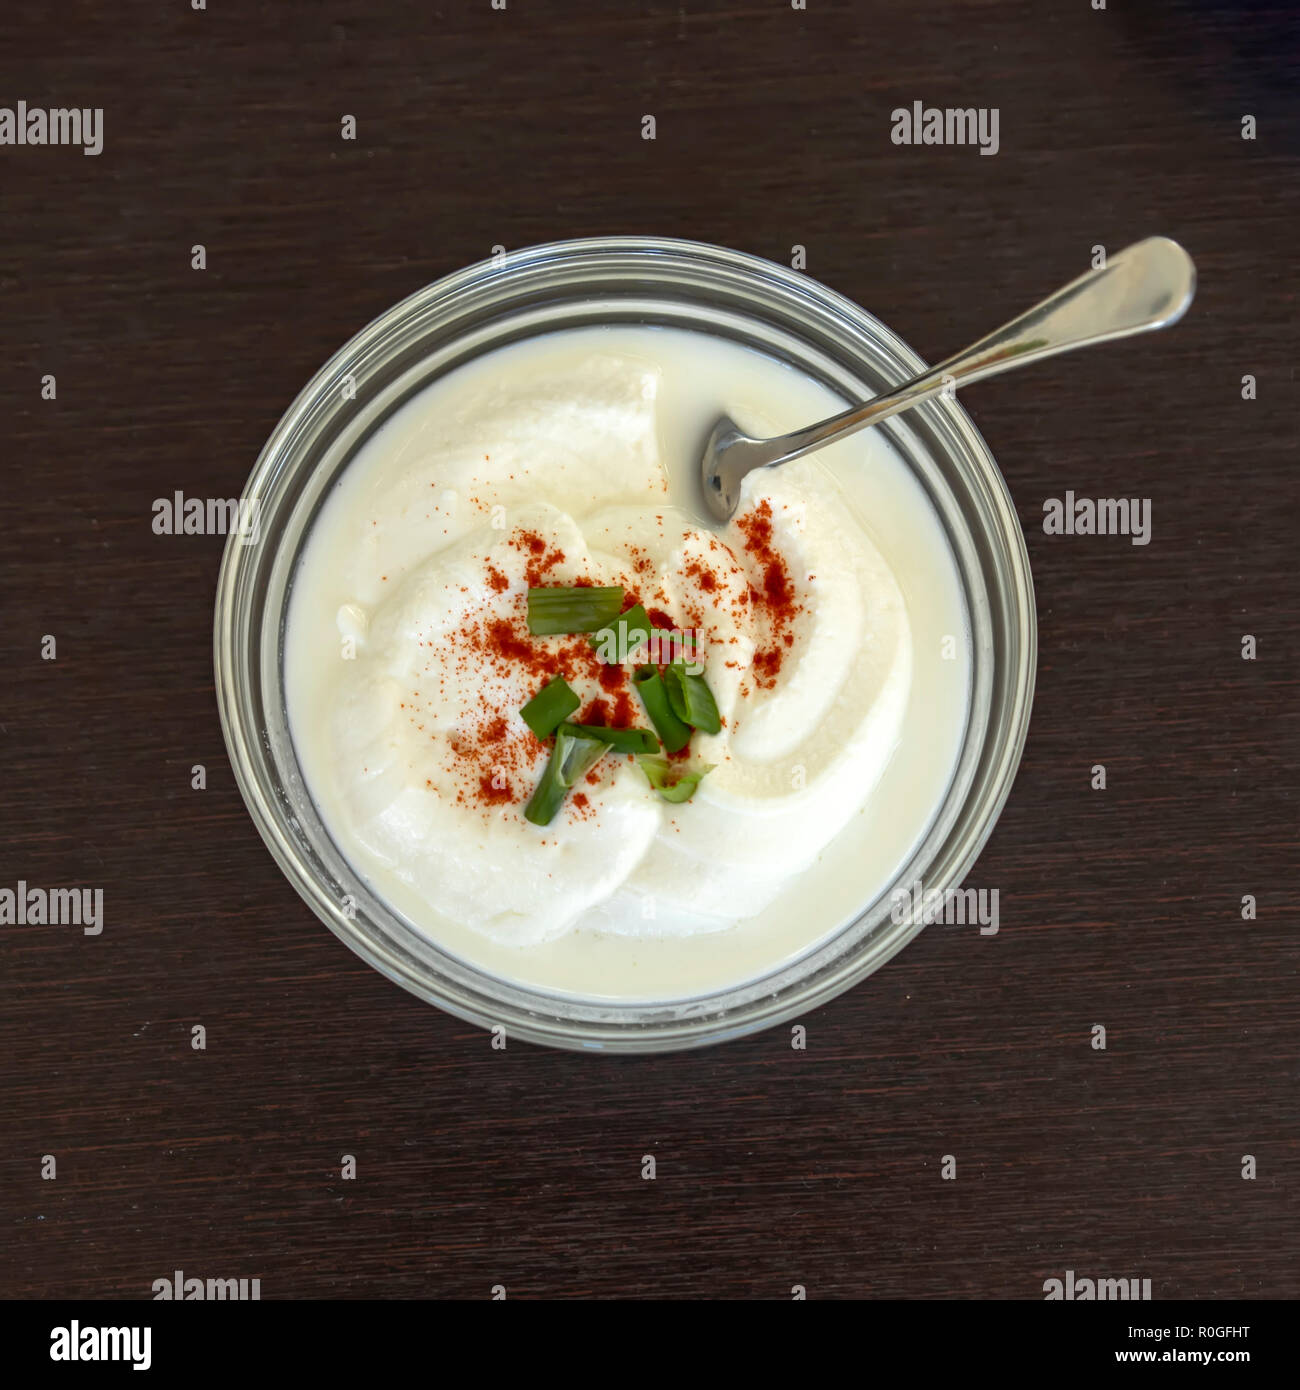 Sour cream in a cup decorated with paprika and green onion sliced. Top view Stock Photo